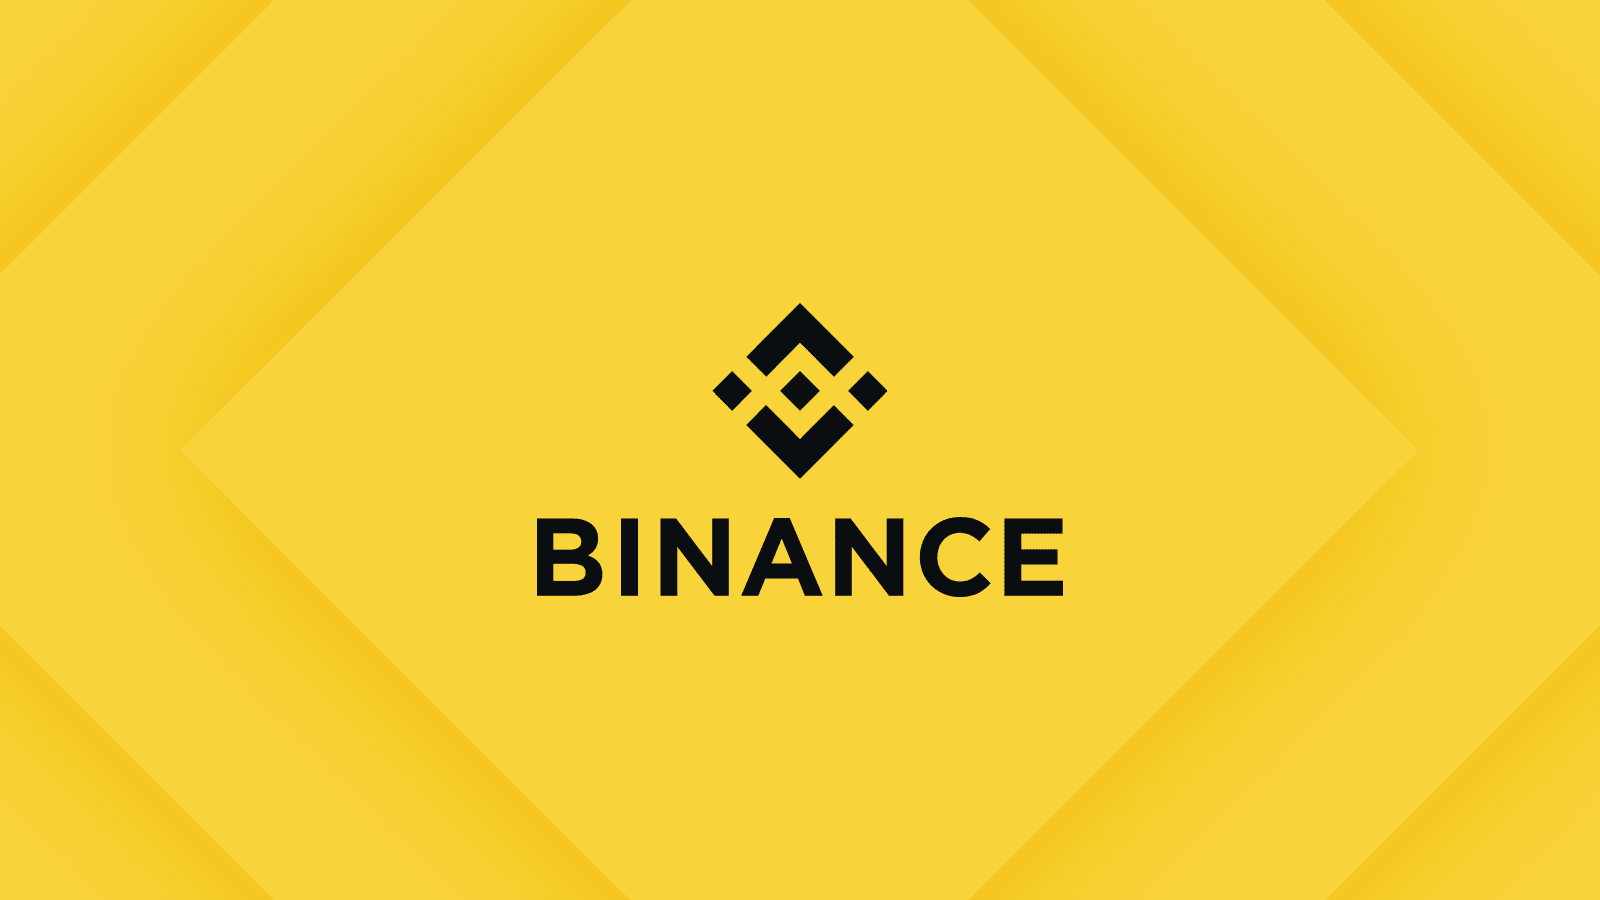 Binance Clears Regulatory Hurdle, Secures Approval in India